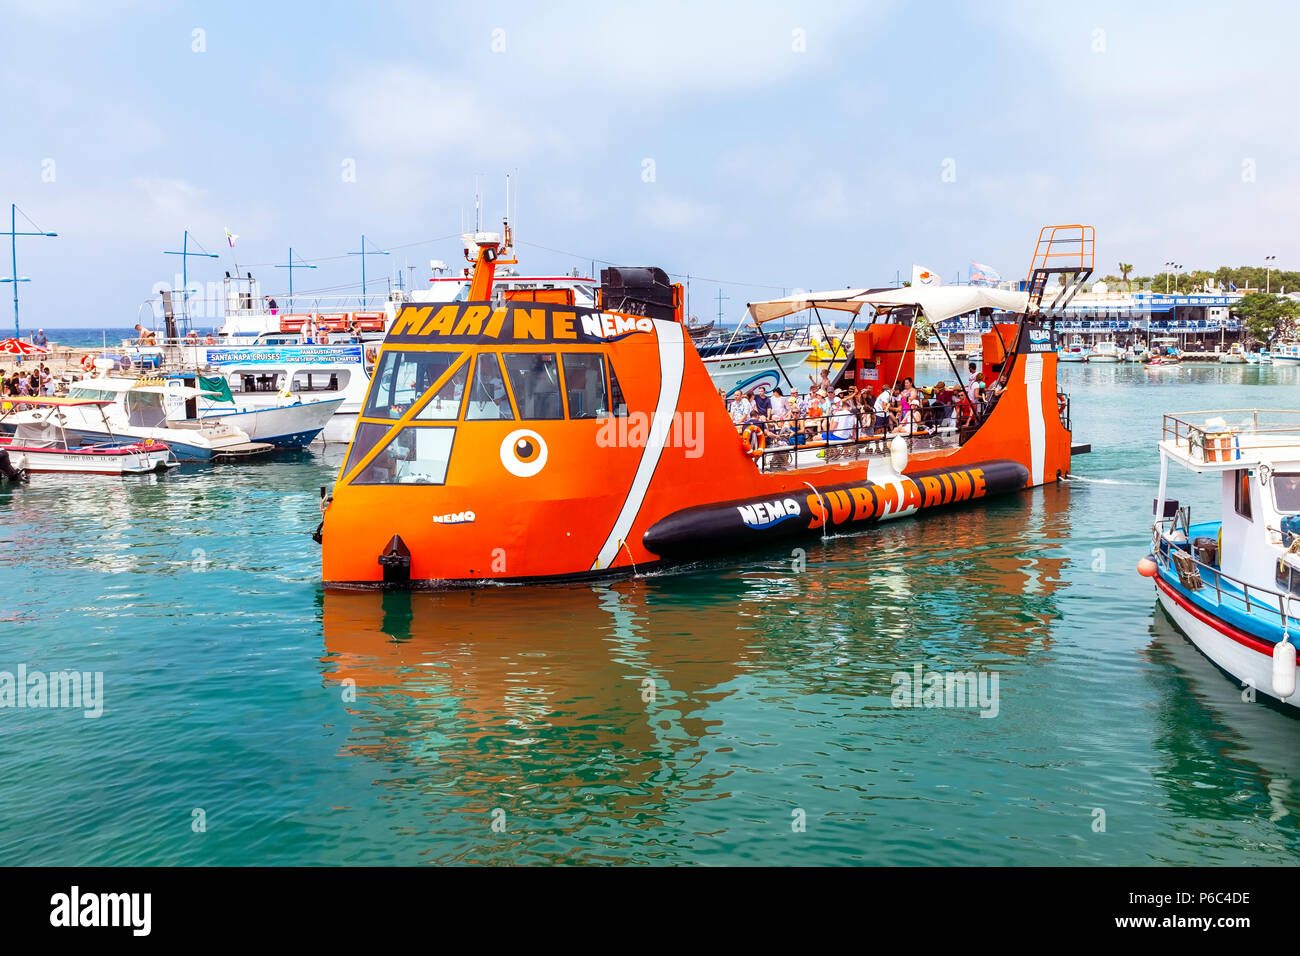 Tourist Cruise Ship In The Shape Of Captain Nemo And Called The Nemo Submarine Sailing From Ayia Napa Harbour With Holiday Makers Aboard Ayia Napa Stock Photo Alamy